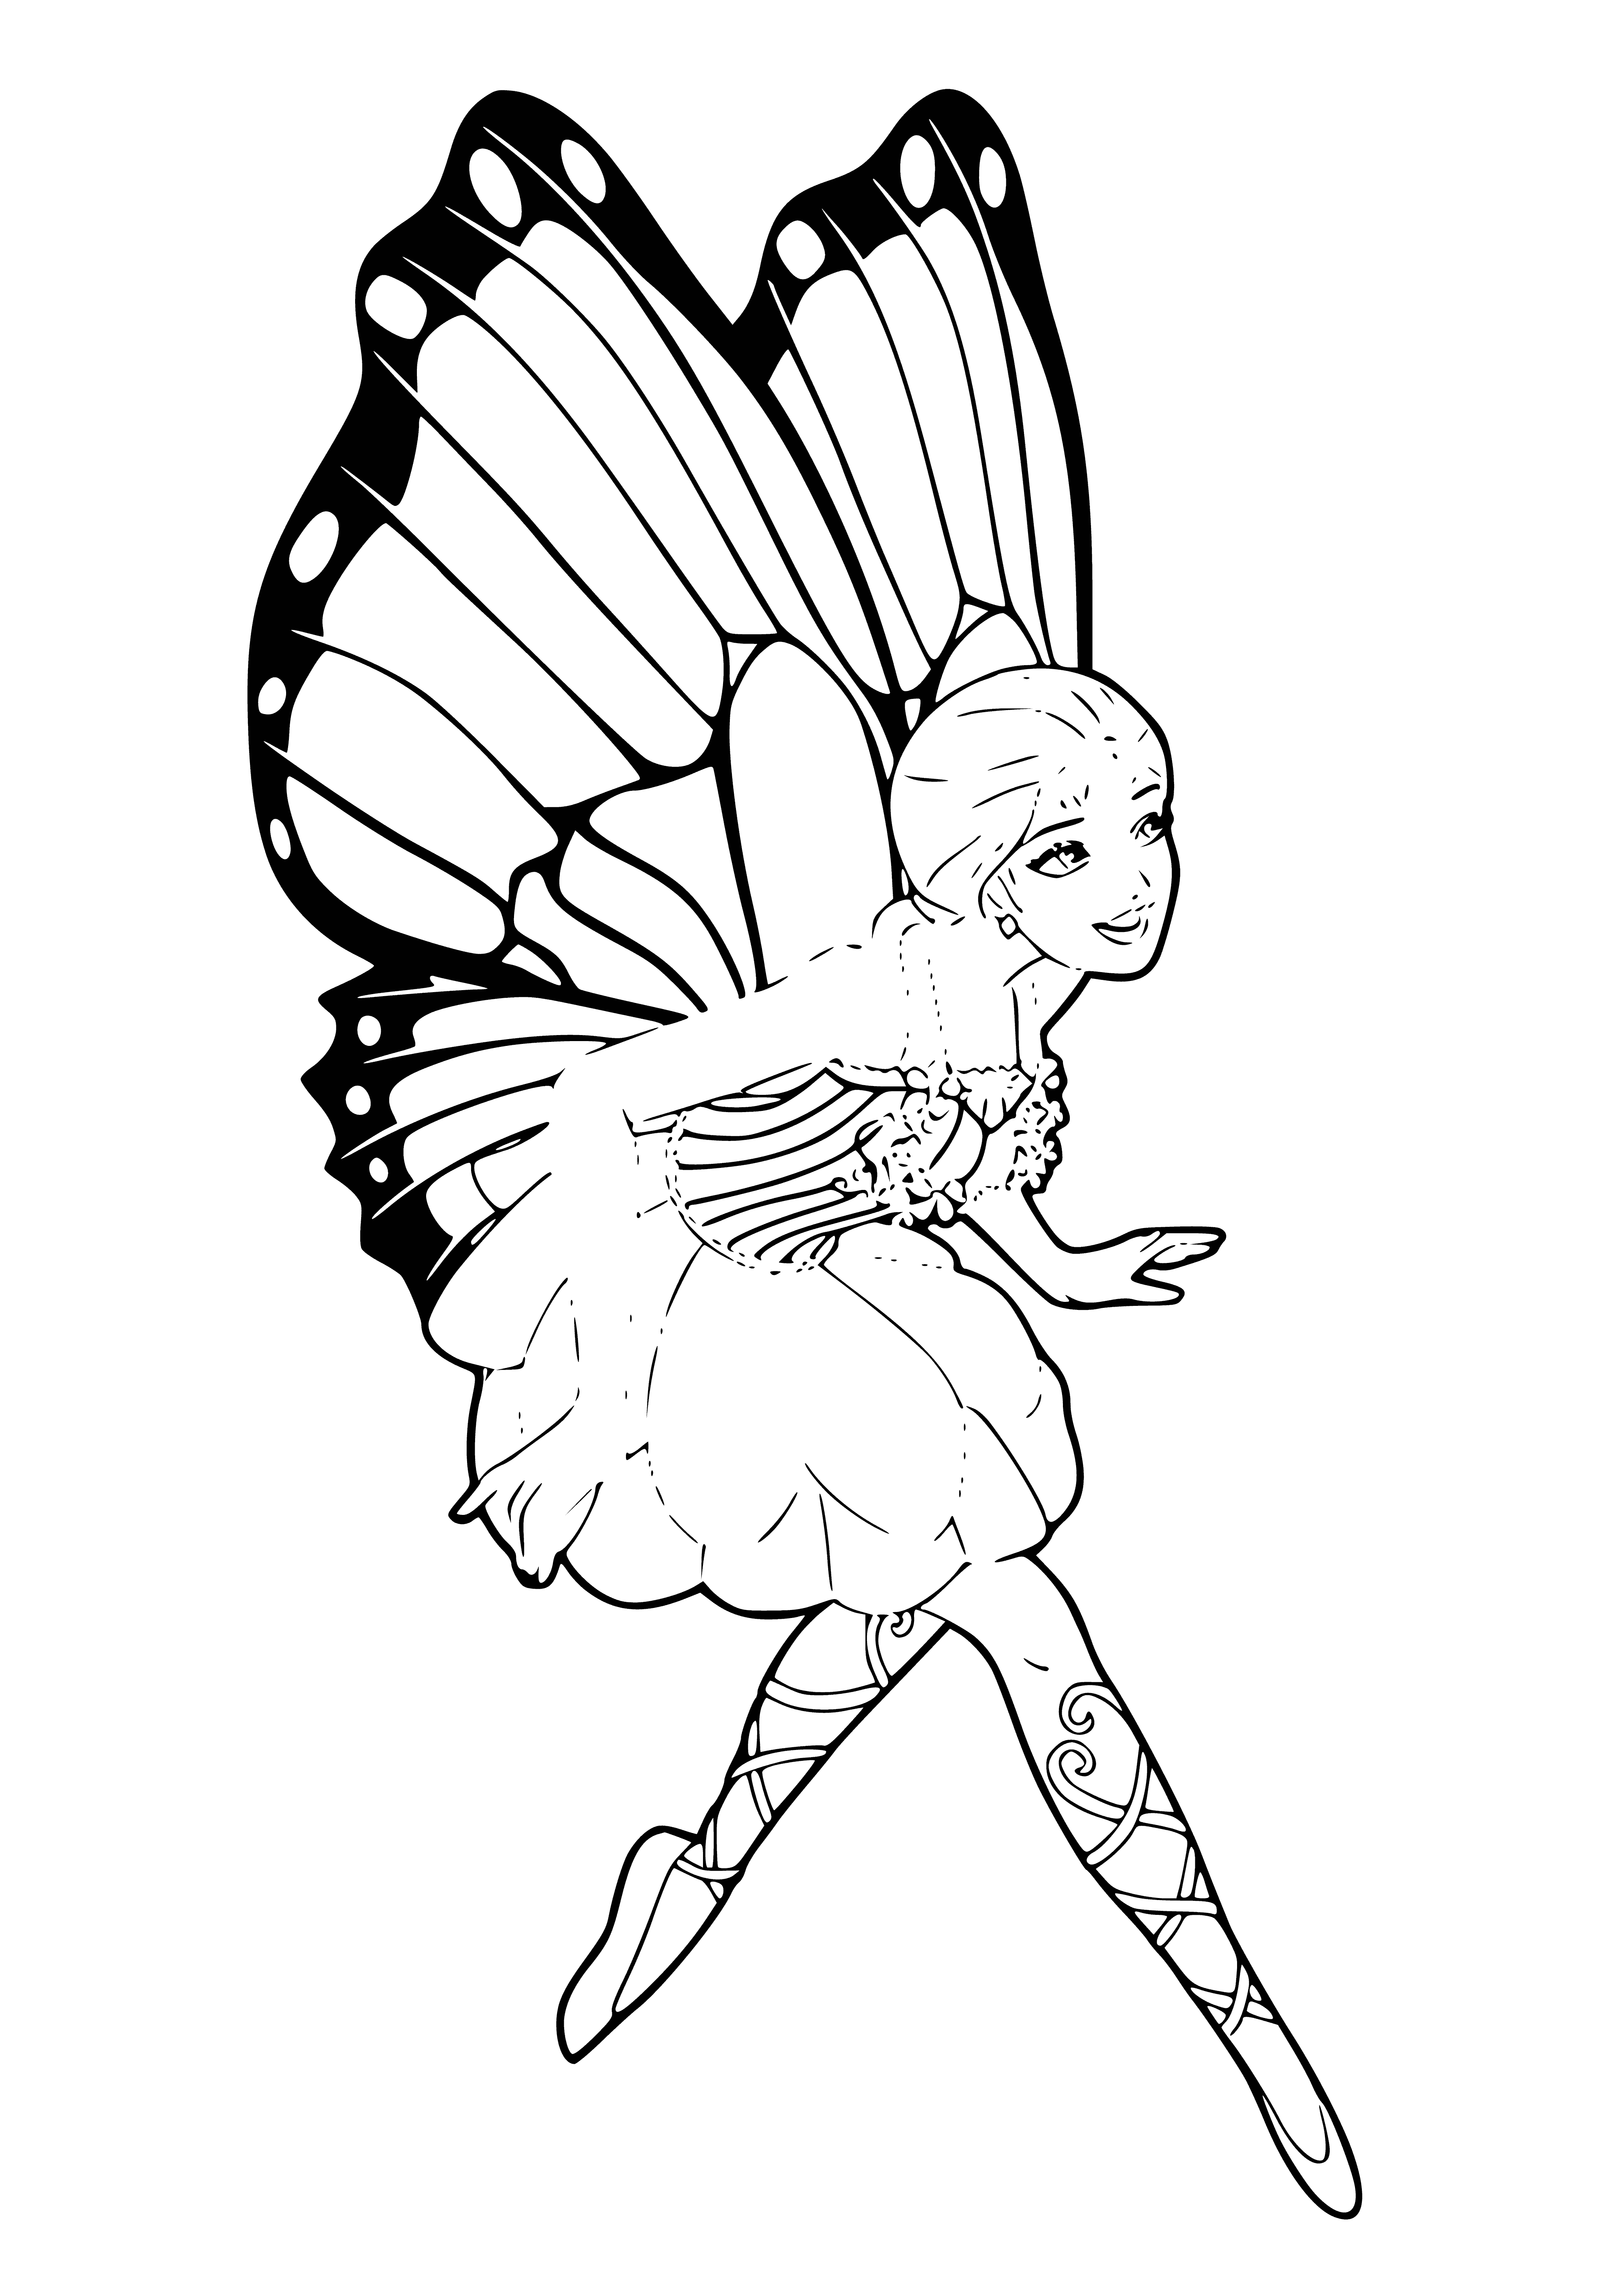 coloring page: The Fairy Barbie - beautiful barbie with long blond hair, blue eyes, pink dress & wings. She holds a wand with a star. #fairytale